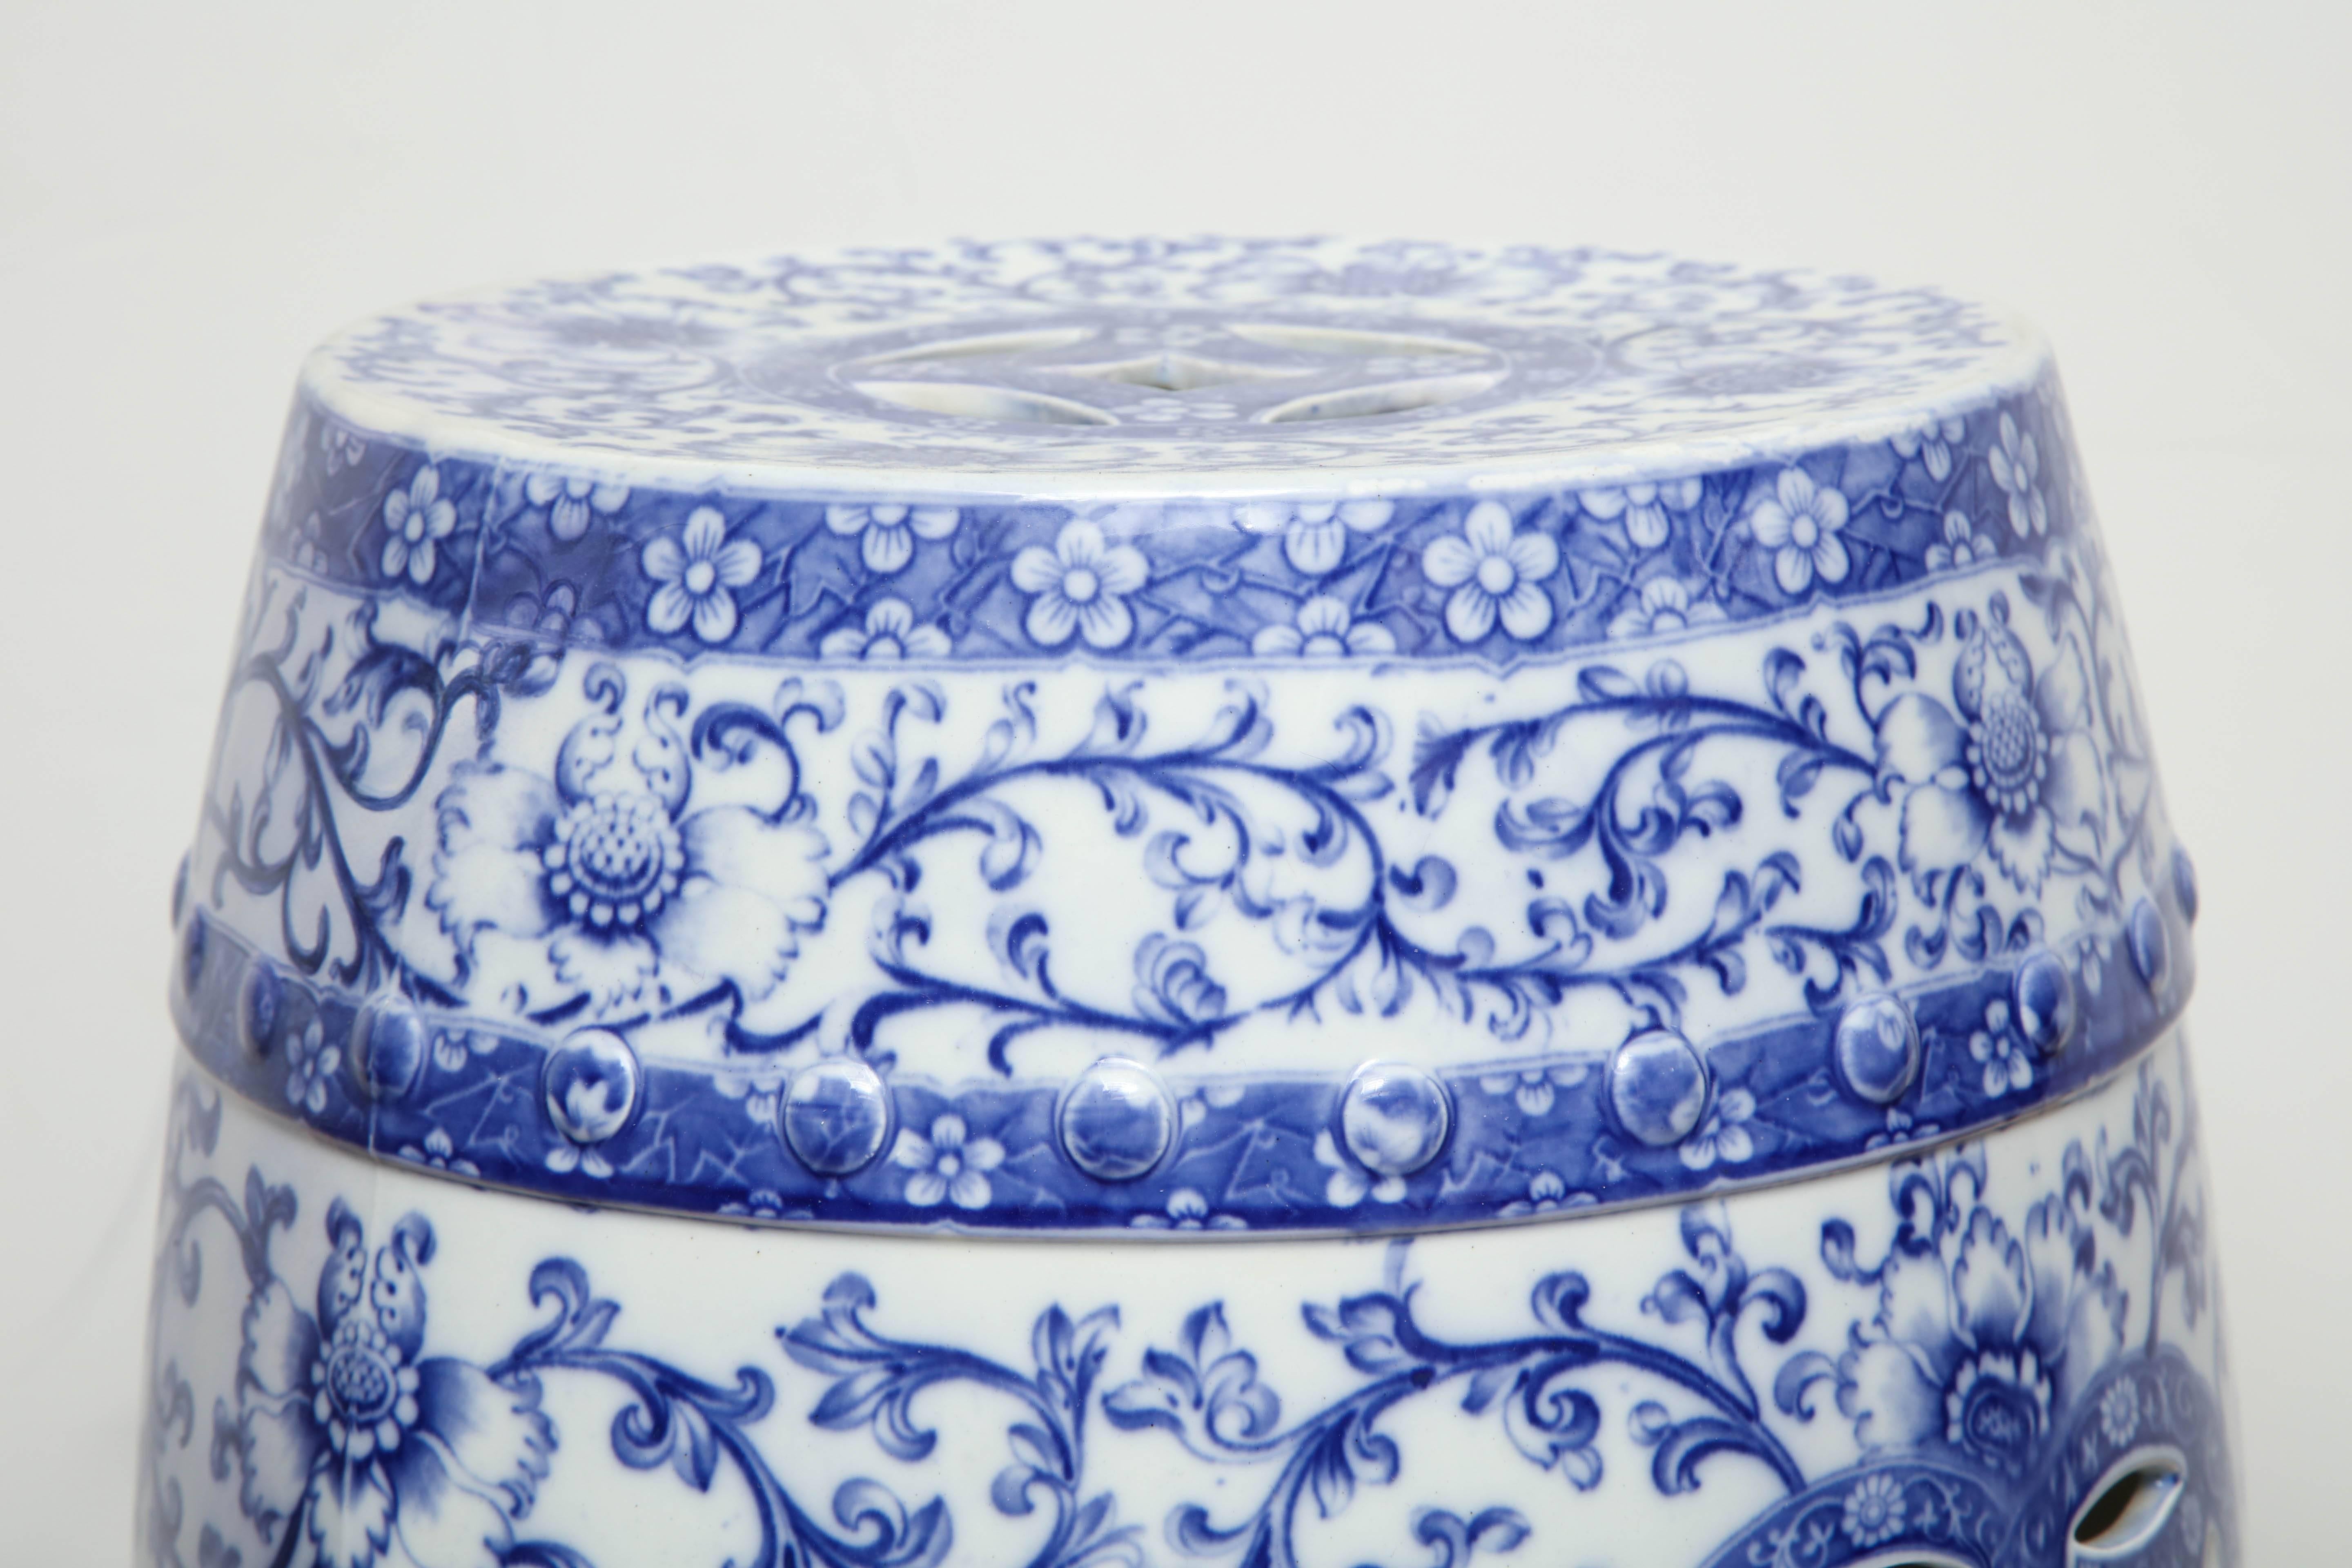 blue and white english pottery